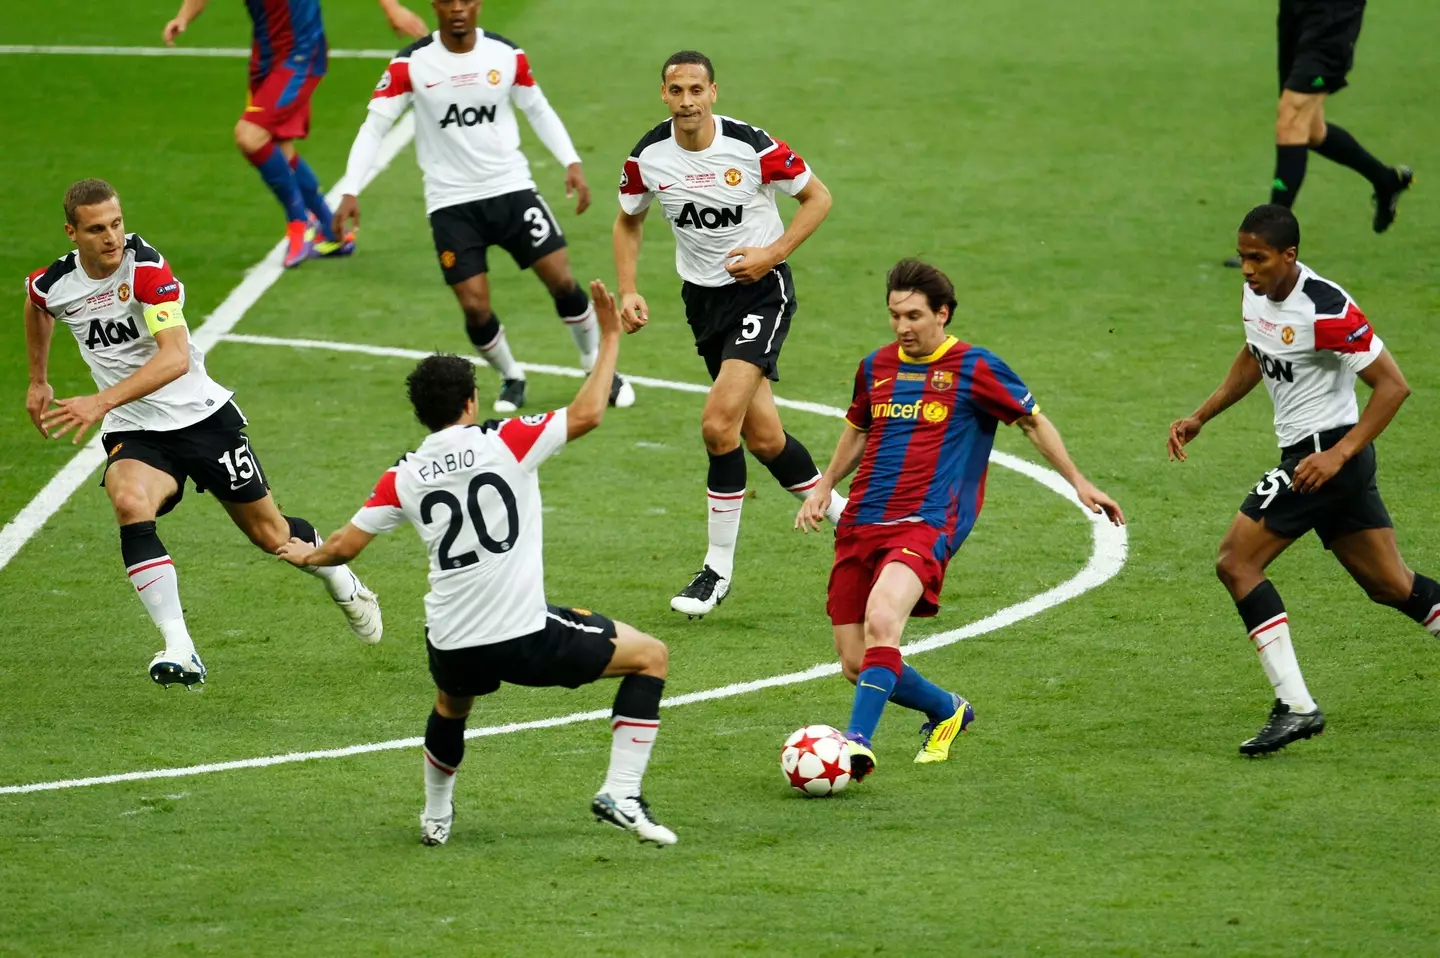 United failed to stop Messi. (Image